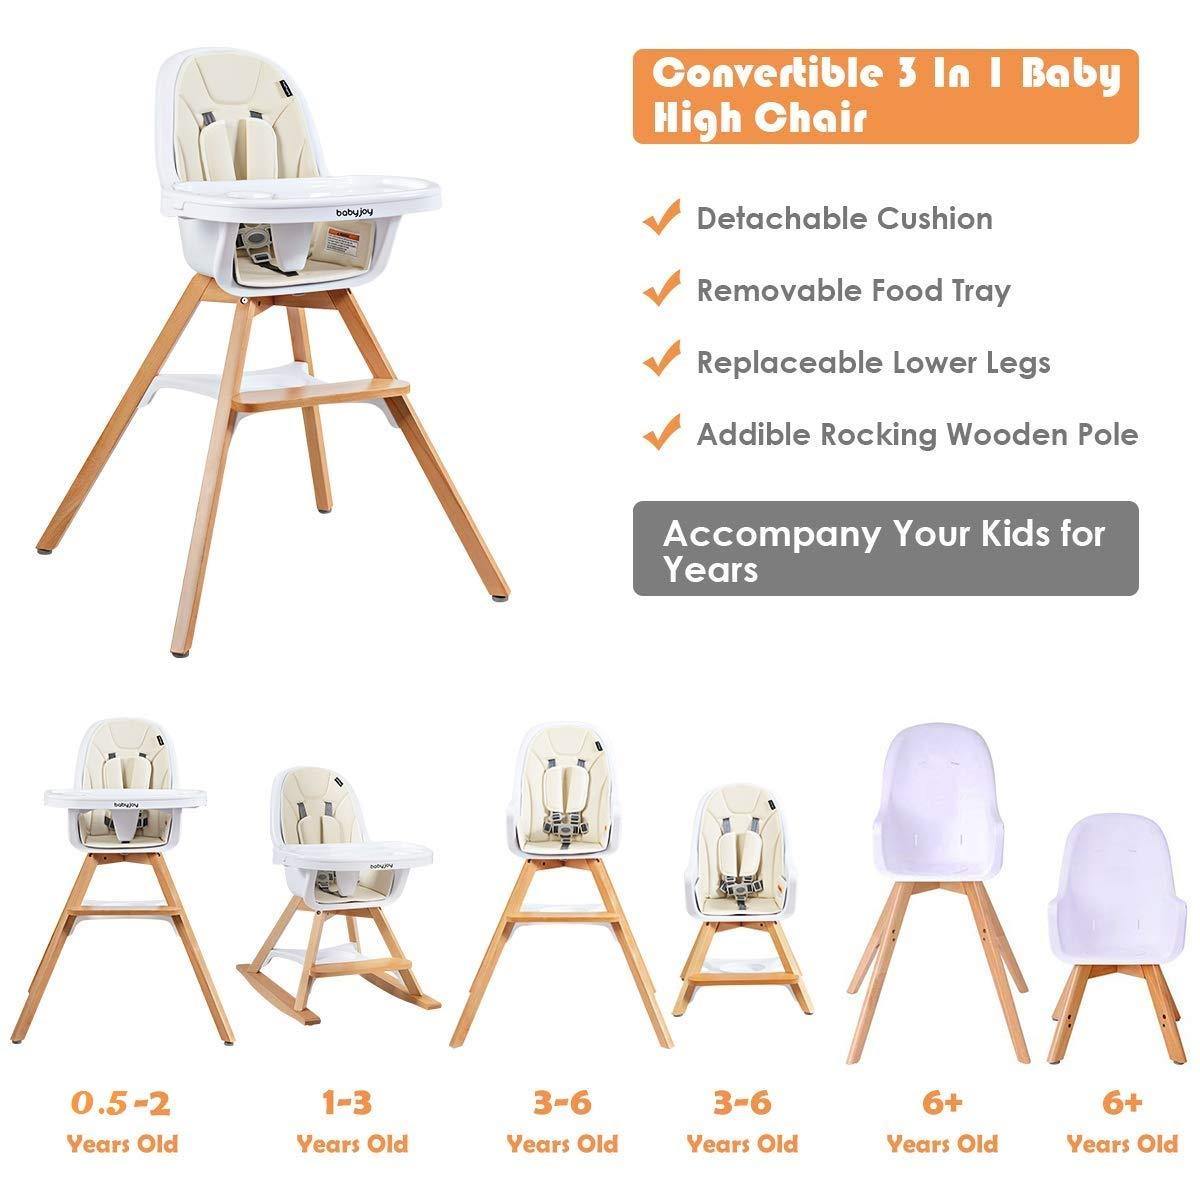 BABY JOY 3 in 1 High Chair, Baby Eat & Grow Convertible Wooden High Chair/Rocking Chair/Booster Seat/Toddler Chair